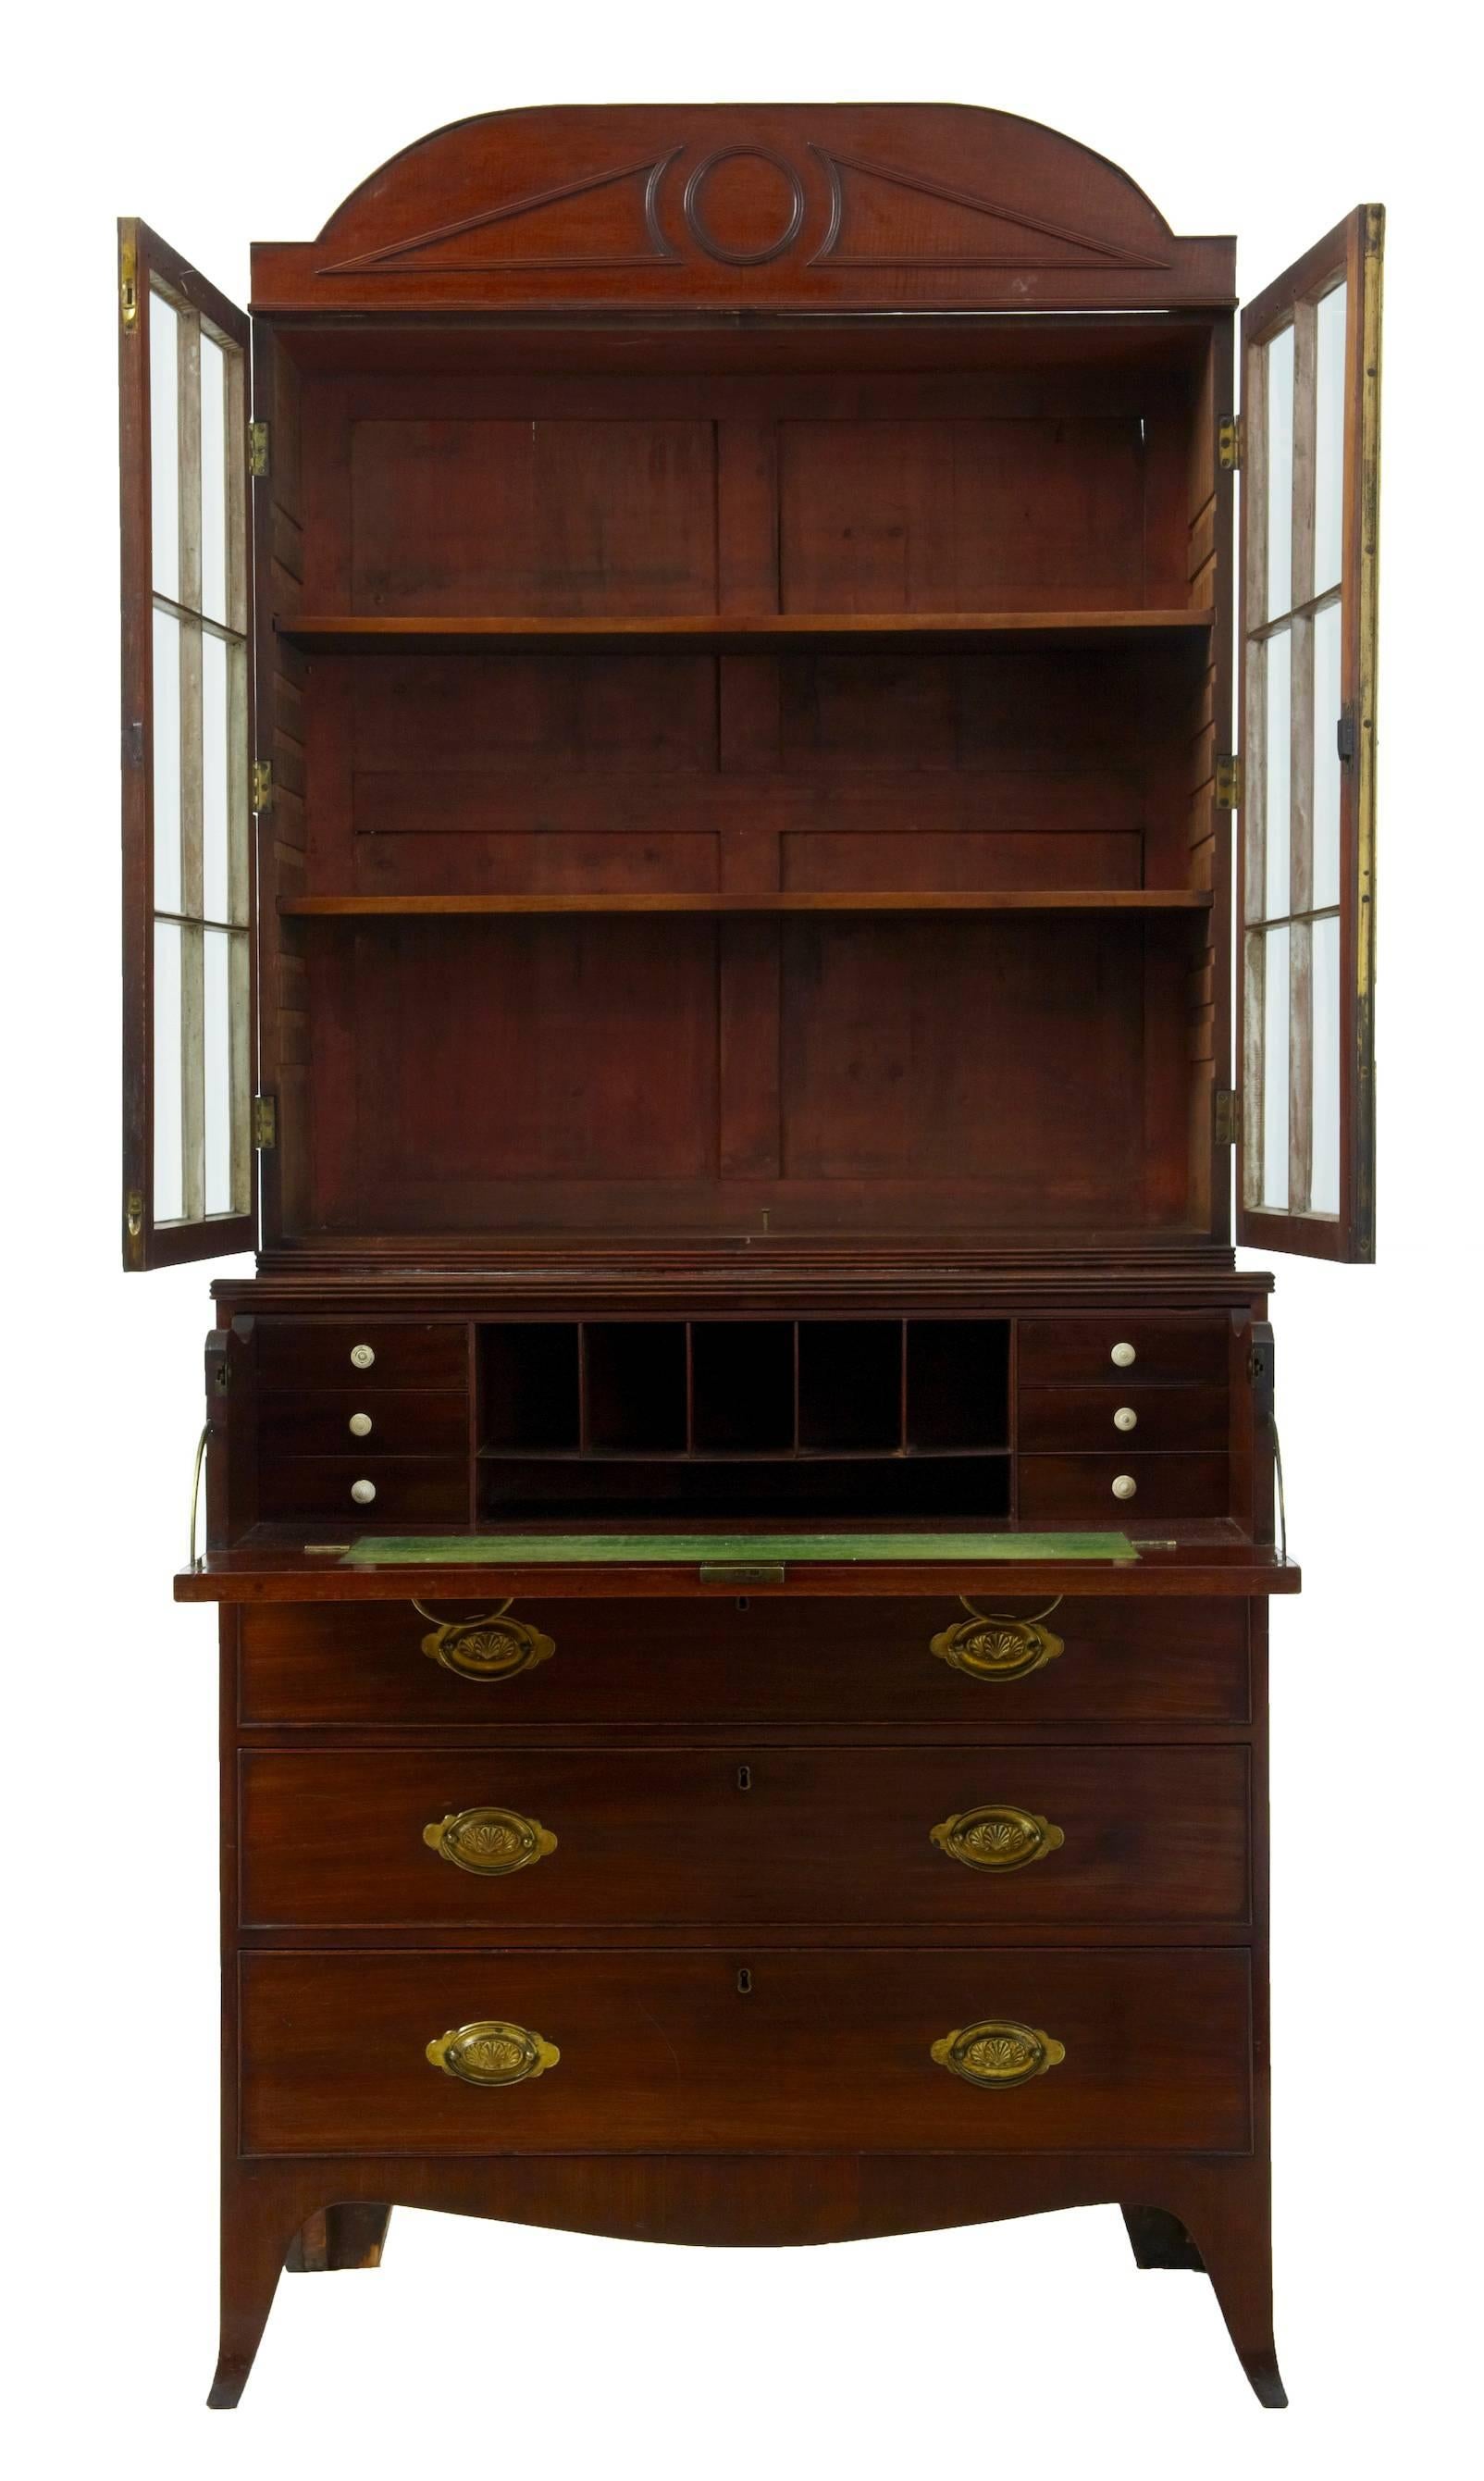 William IV period secretaire bookcase, circa 1835.
Top section with original glazing and two adjustable shelves.
Bottom section with pull-out fully fitted writing interior, below which are three drawers.
Standing on tapered legs.
Some surface